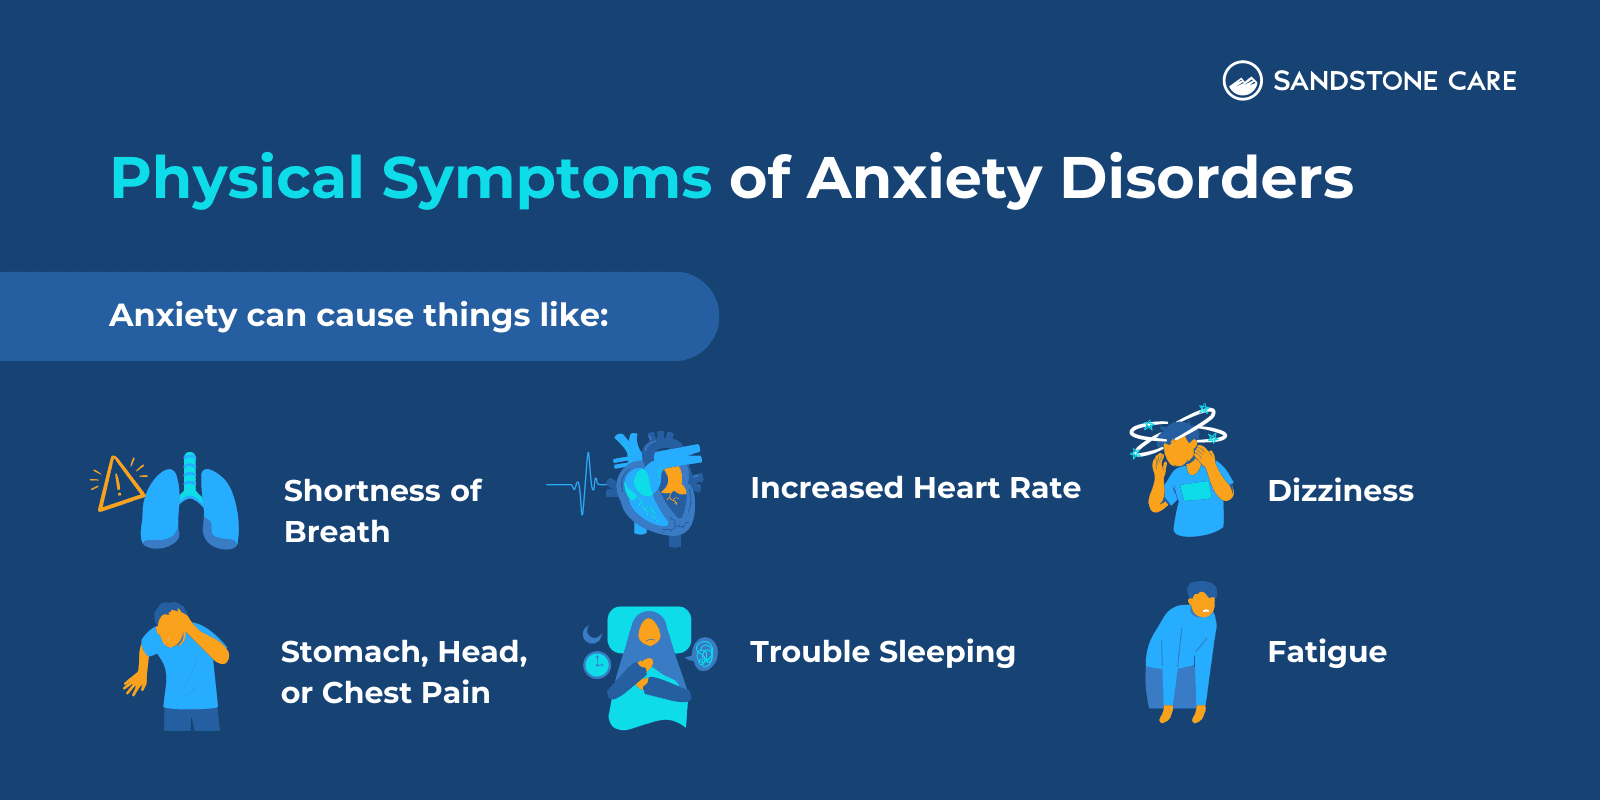 Physical Symptoms of Anxiety Disorders